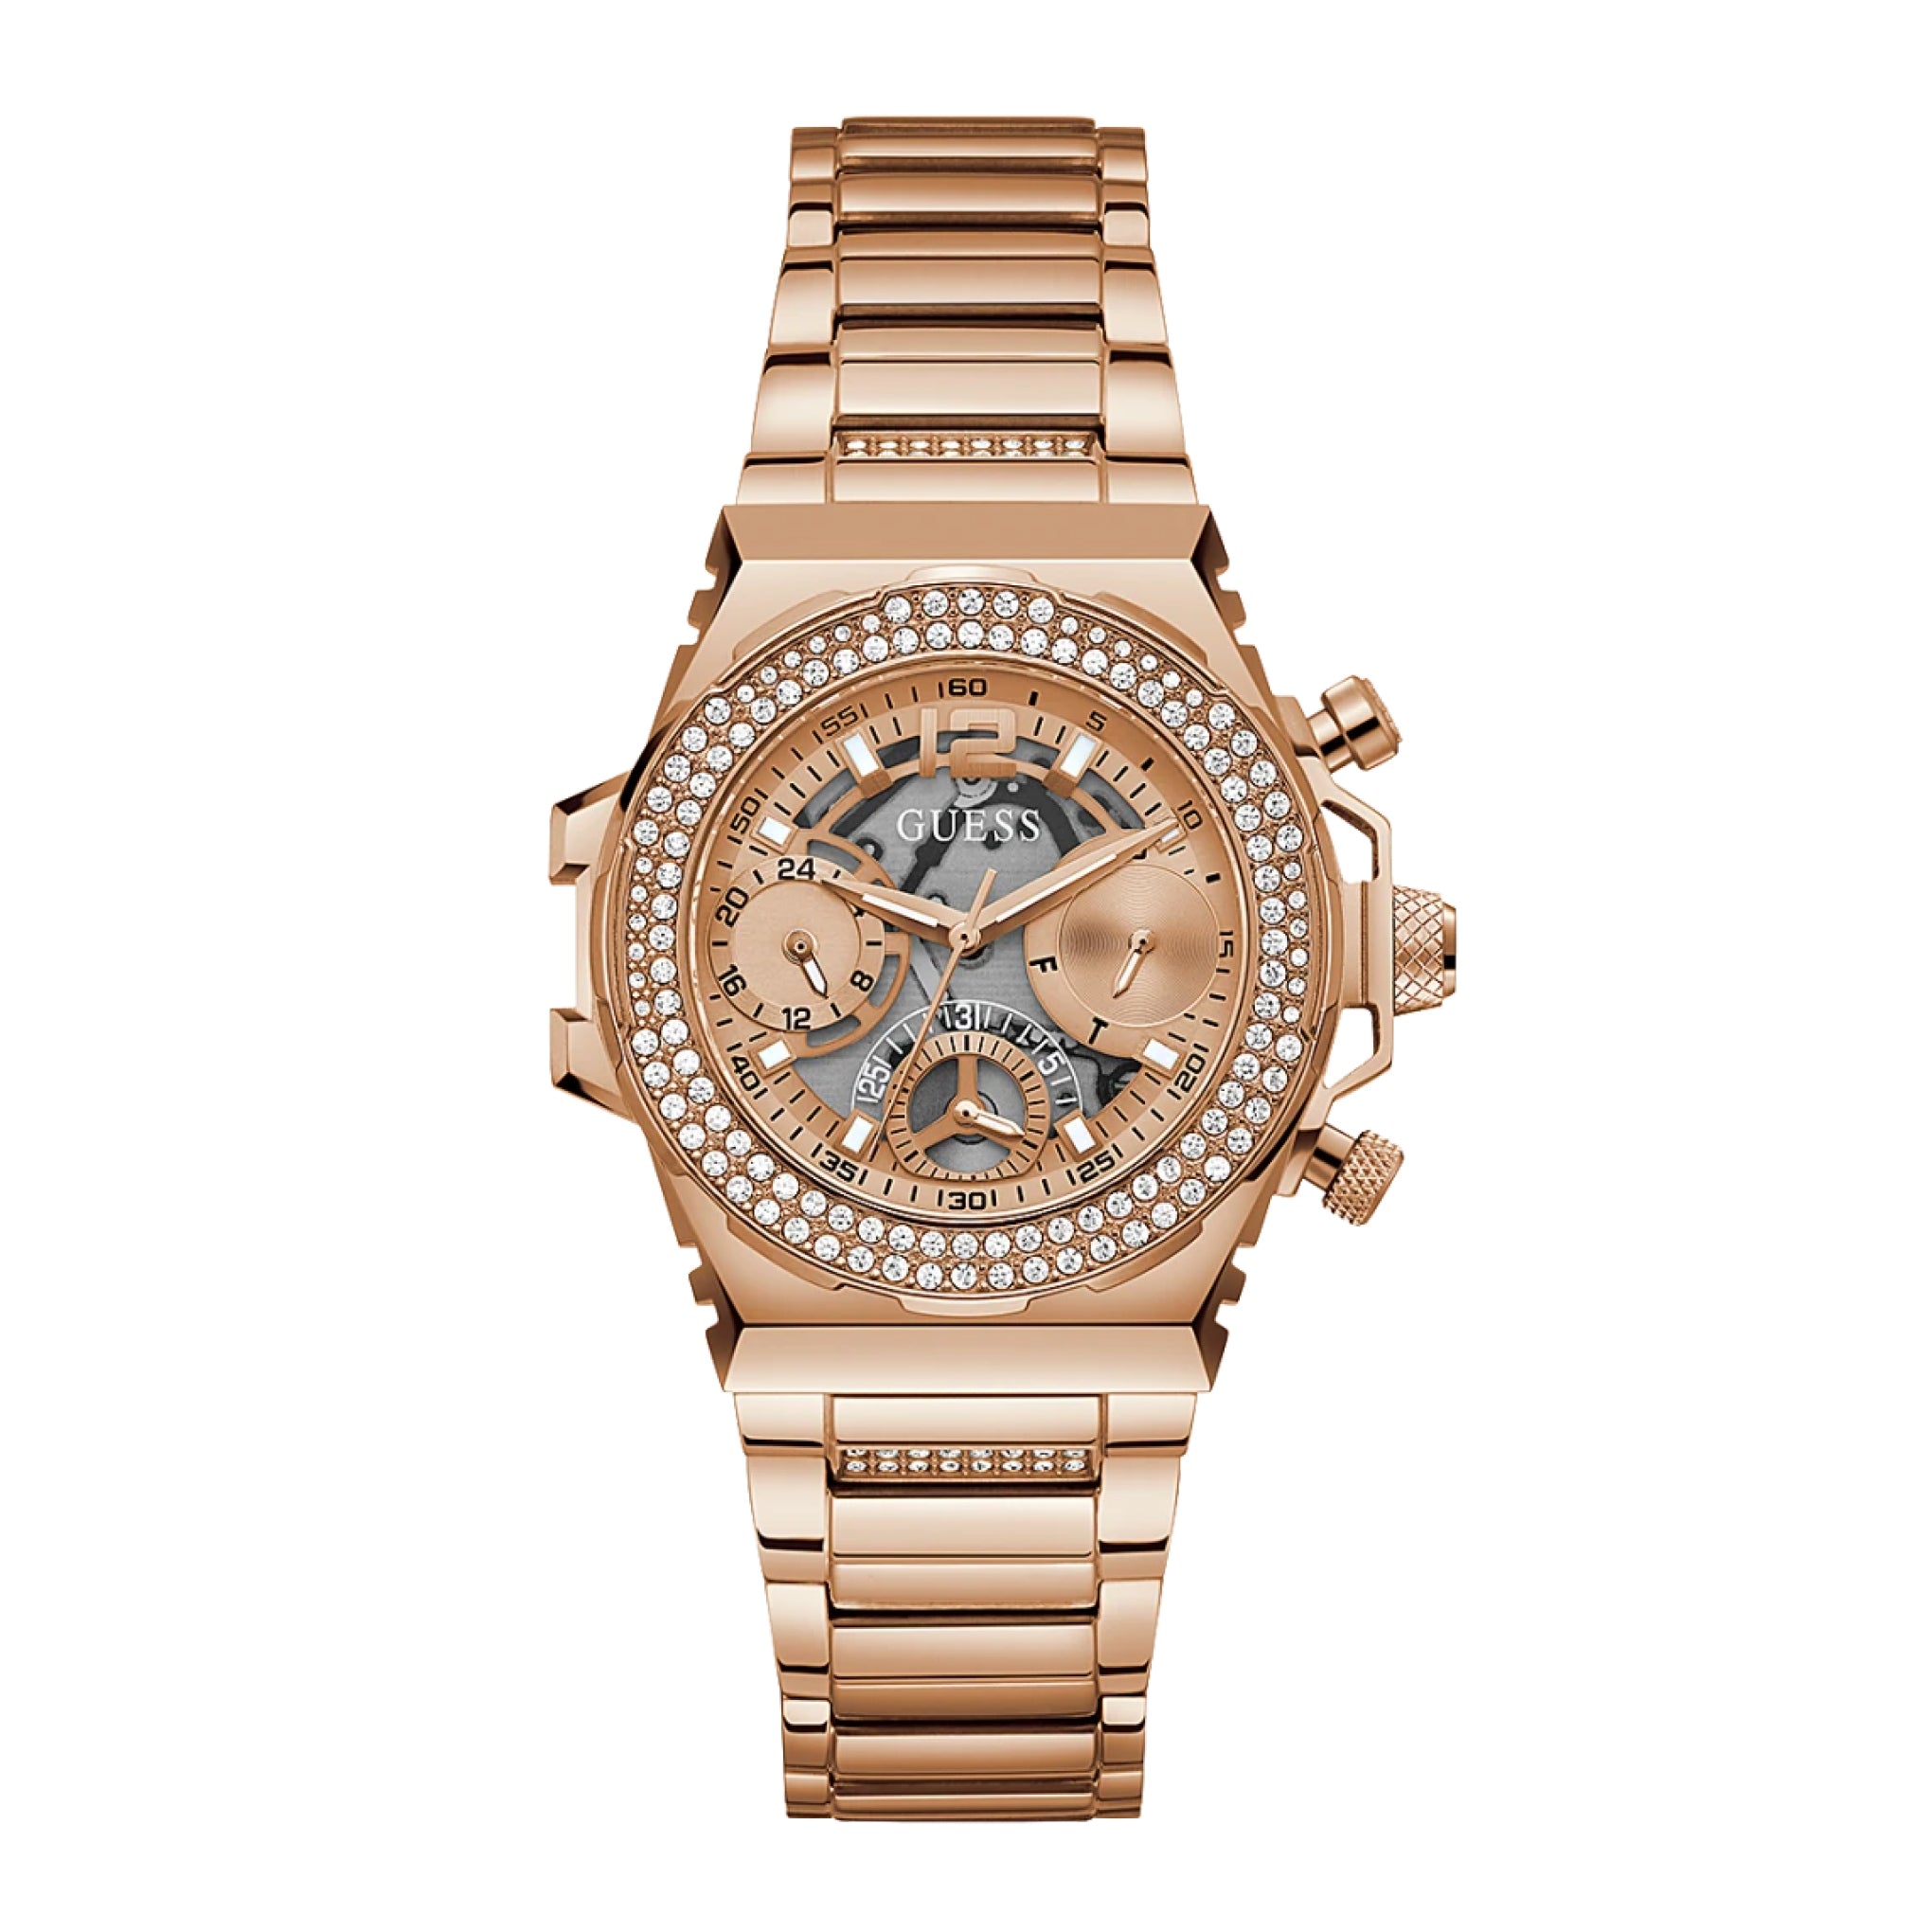 Guess Womens Watch - GW0033L3 - LifeStyle Collection